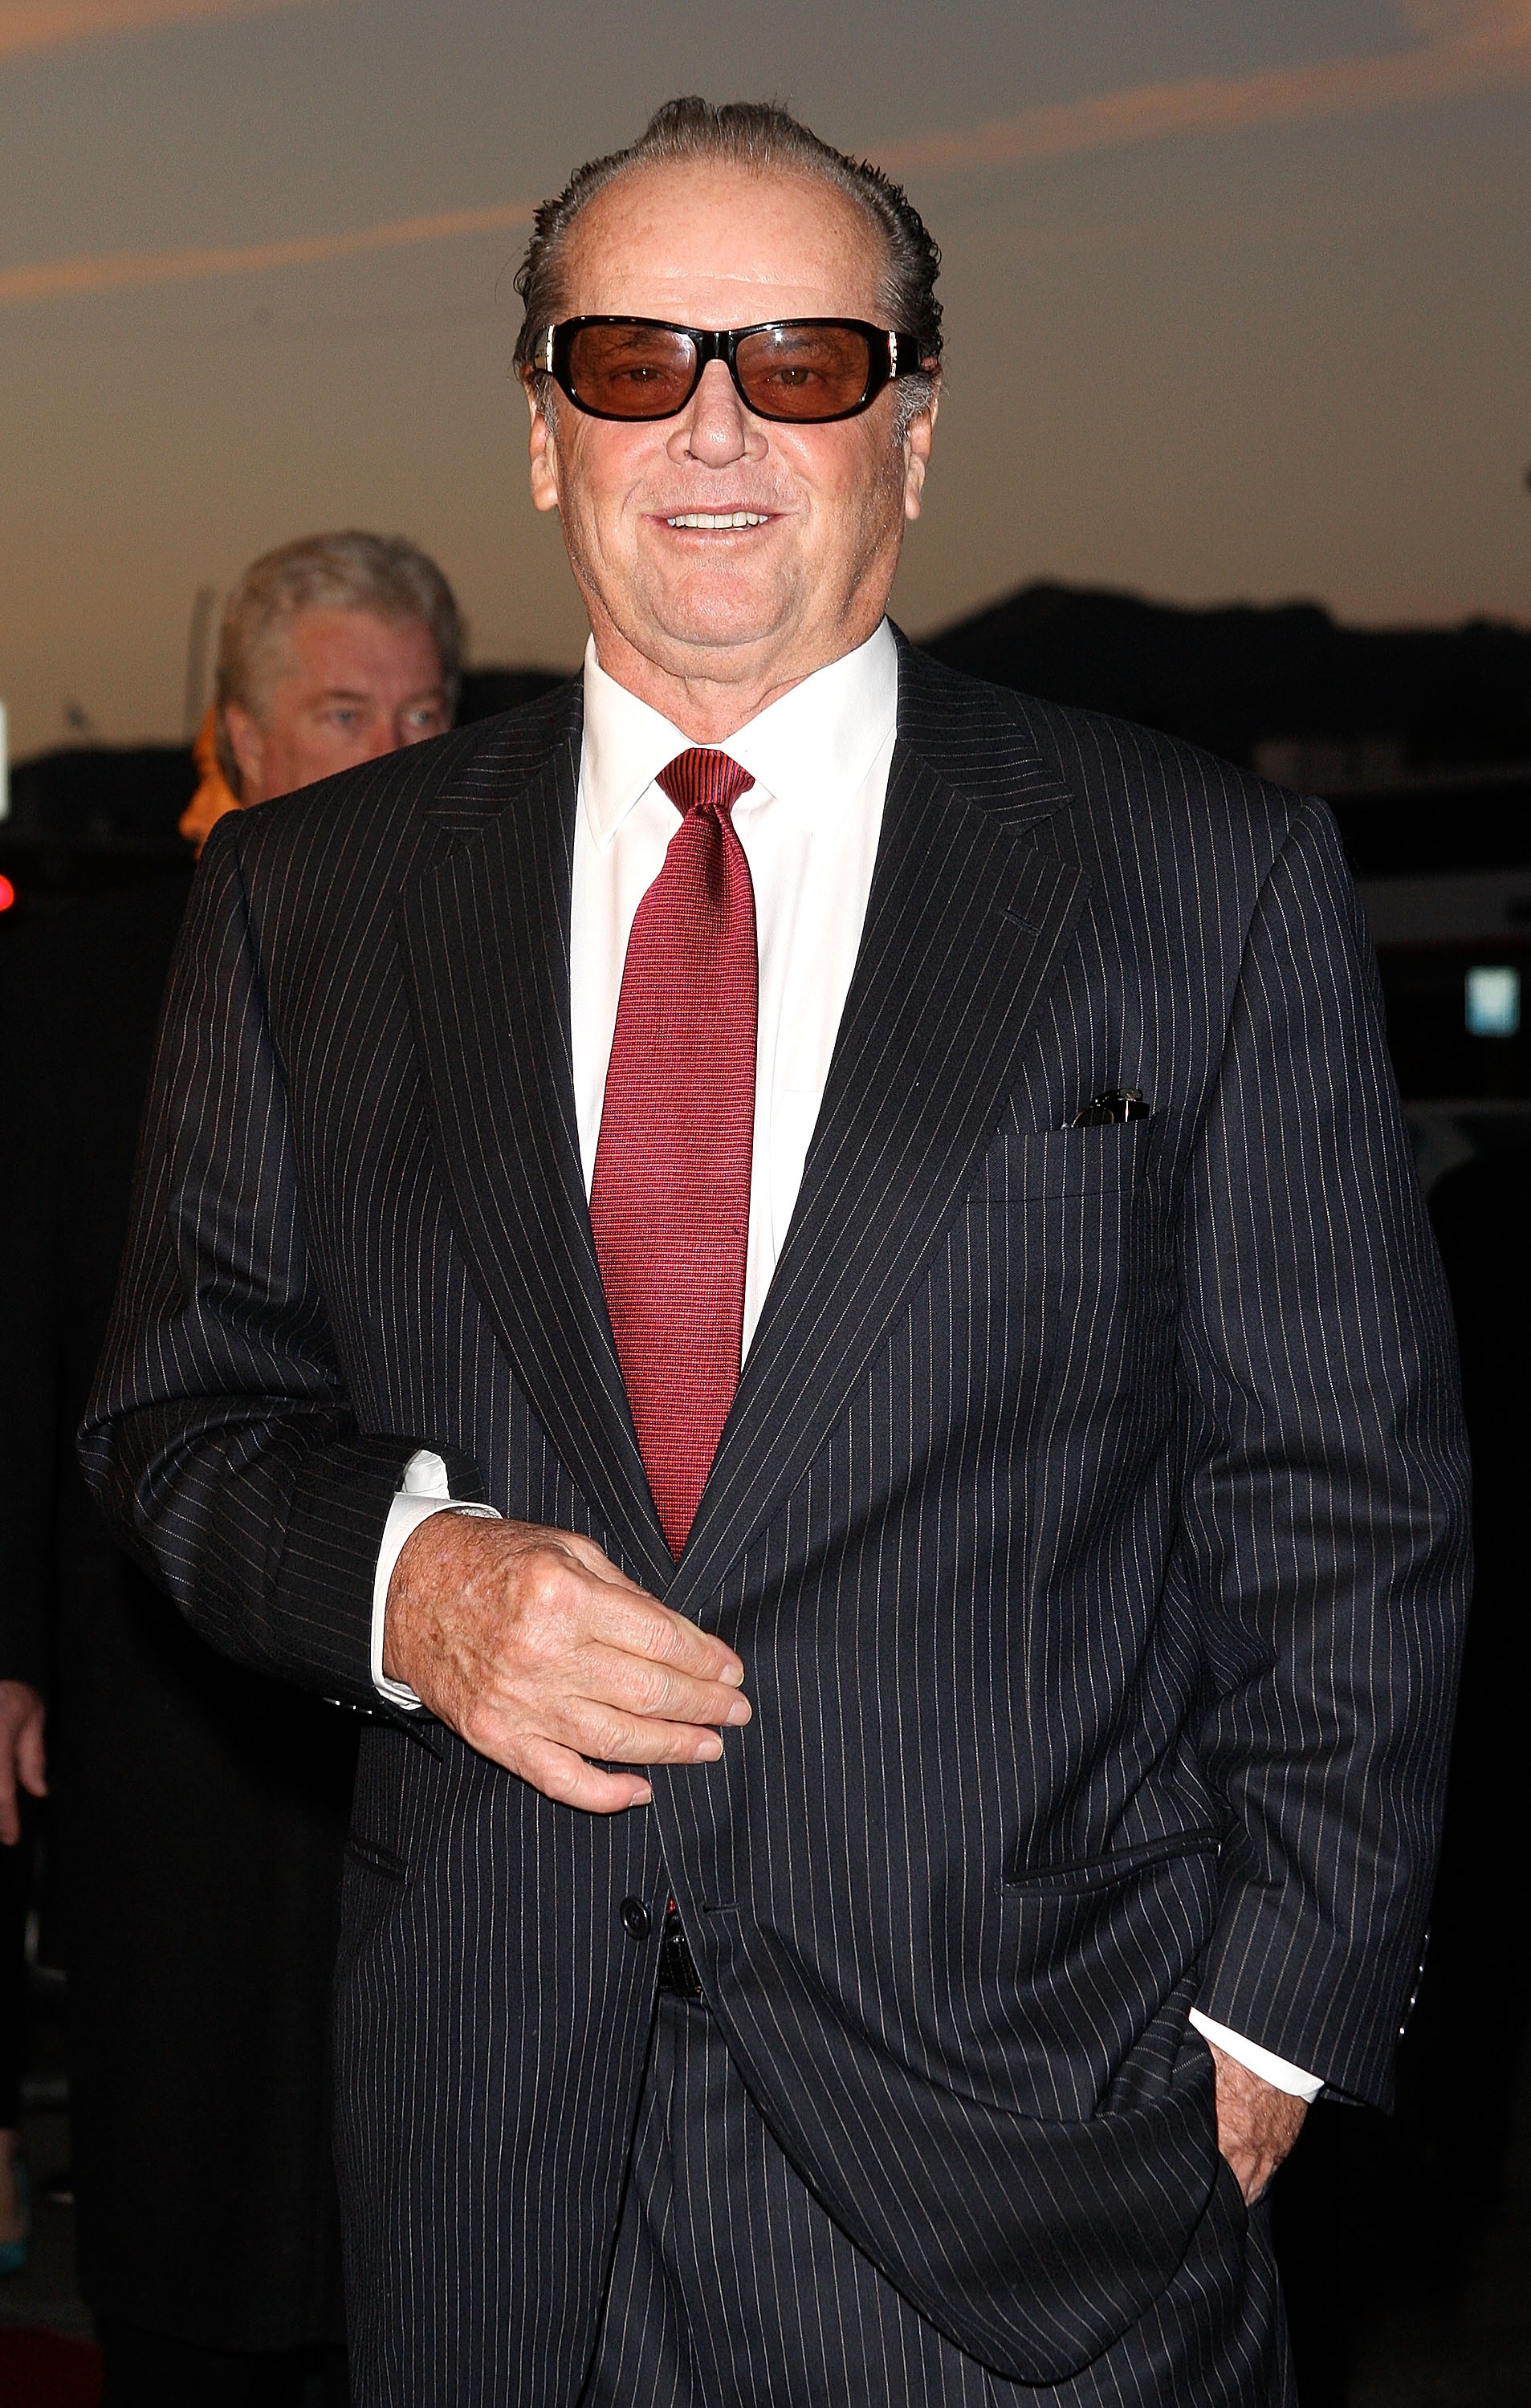 Man in pinstripe suit and red tie at event